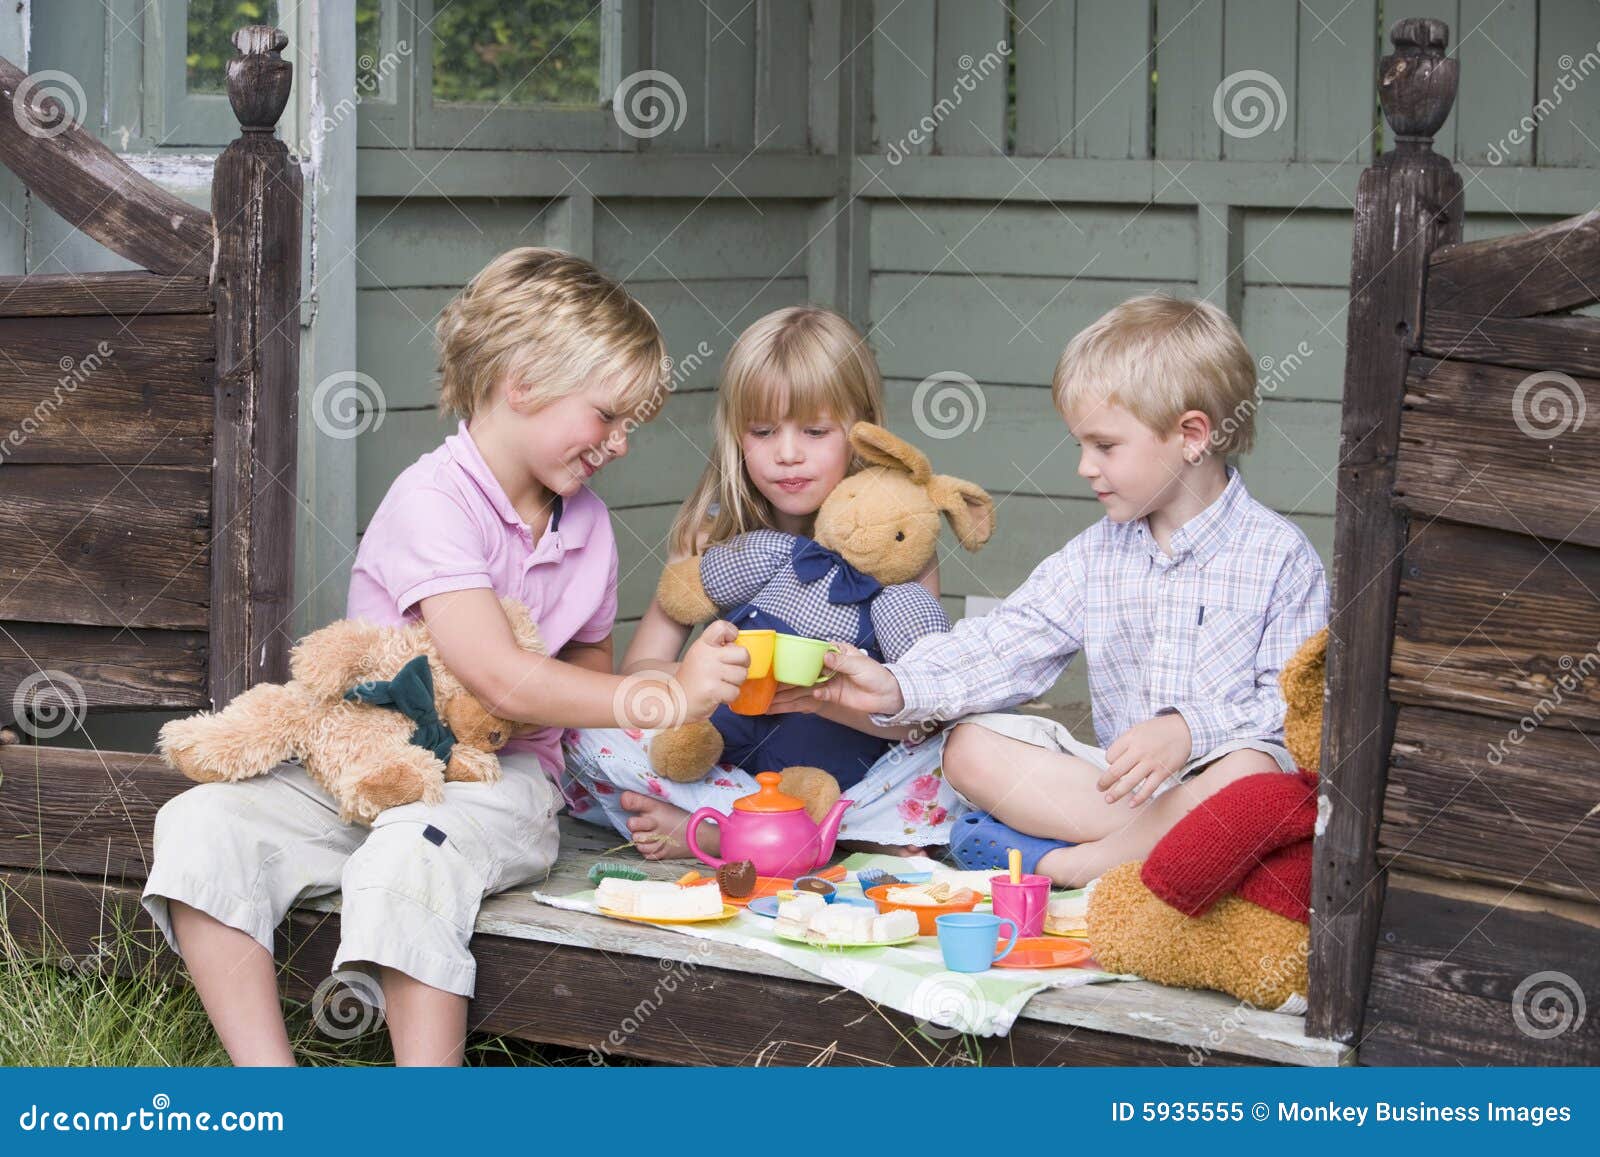 Three Young Children In Shed Playing Tea Royalty Free ...